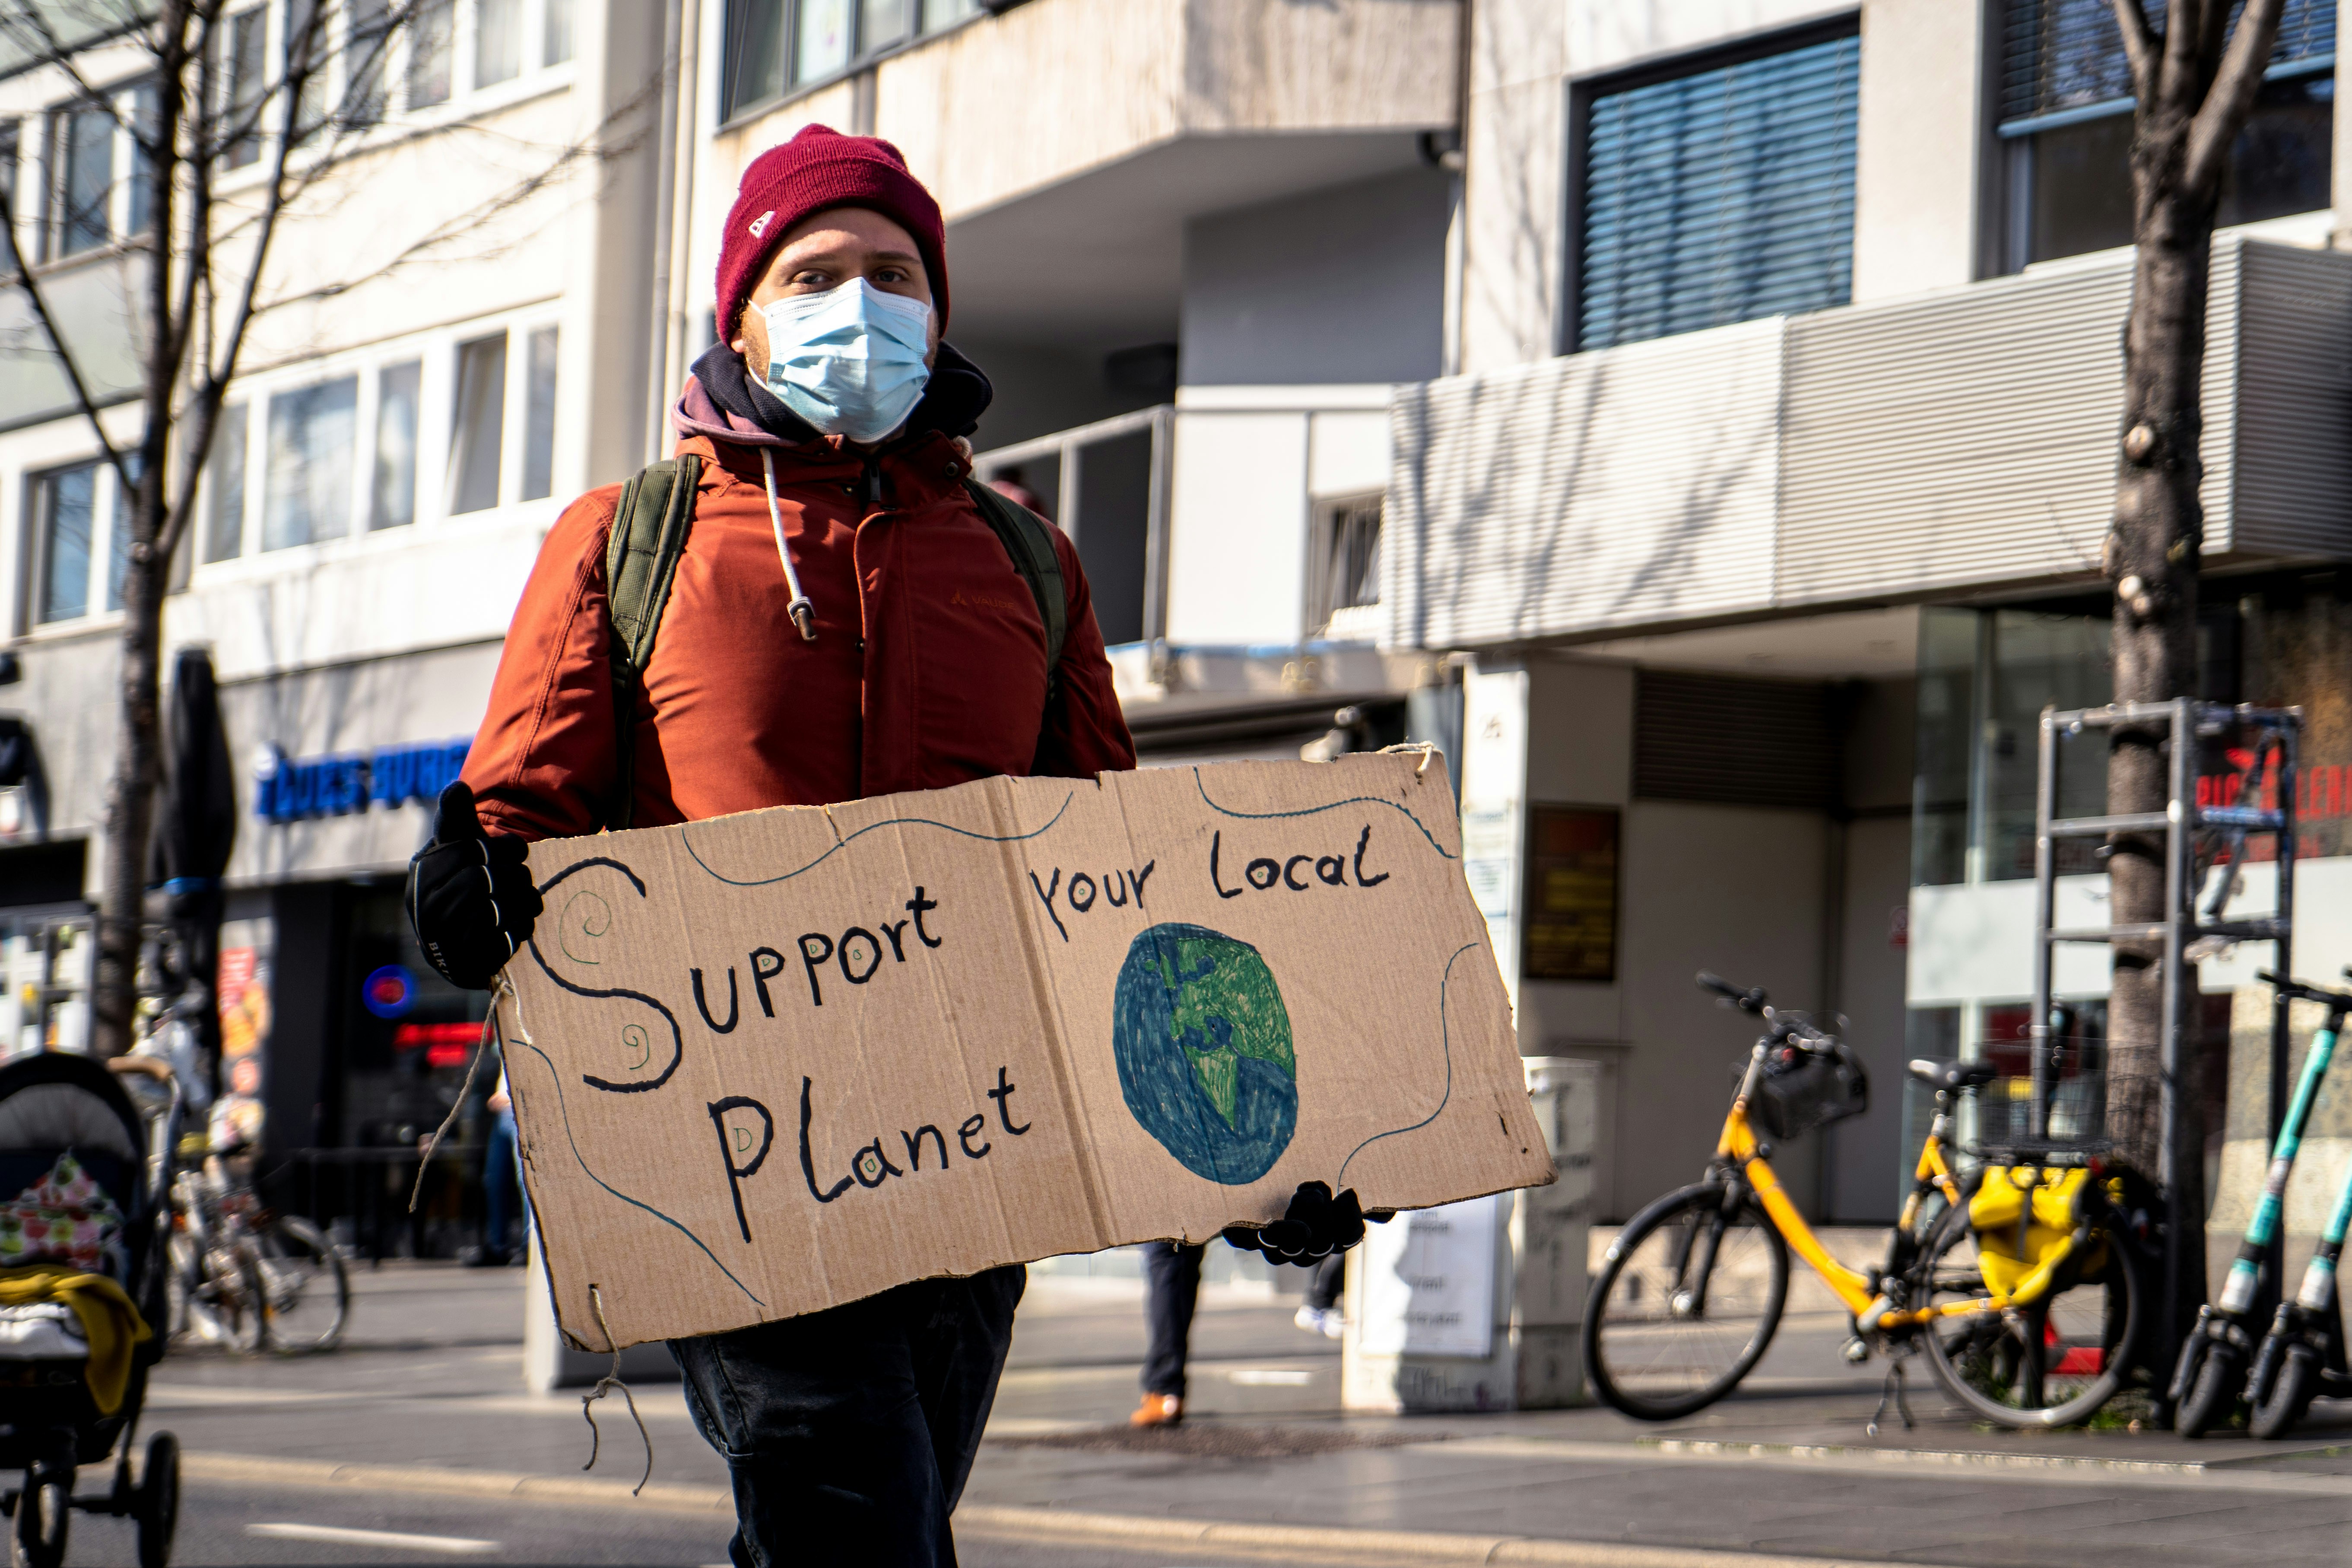 Support your local Planet!</p>
<p>– Fridays for Future Bonn, 2021-03-19″ style=”max-width:450px;float:left;padding:10px 10px 10px 0px;border:0px;”>One of the astounding features is its oscillating function, which allows warm air to be evenly distributed throughout the room, increasing heating efficiency and consistency.</p>
<p>Finally,  <a href=